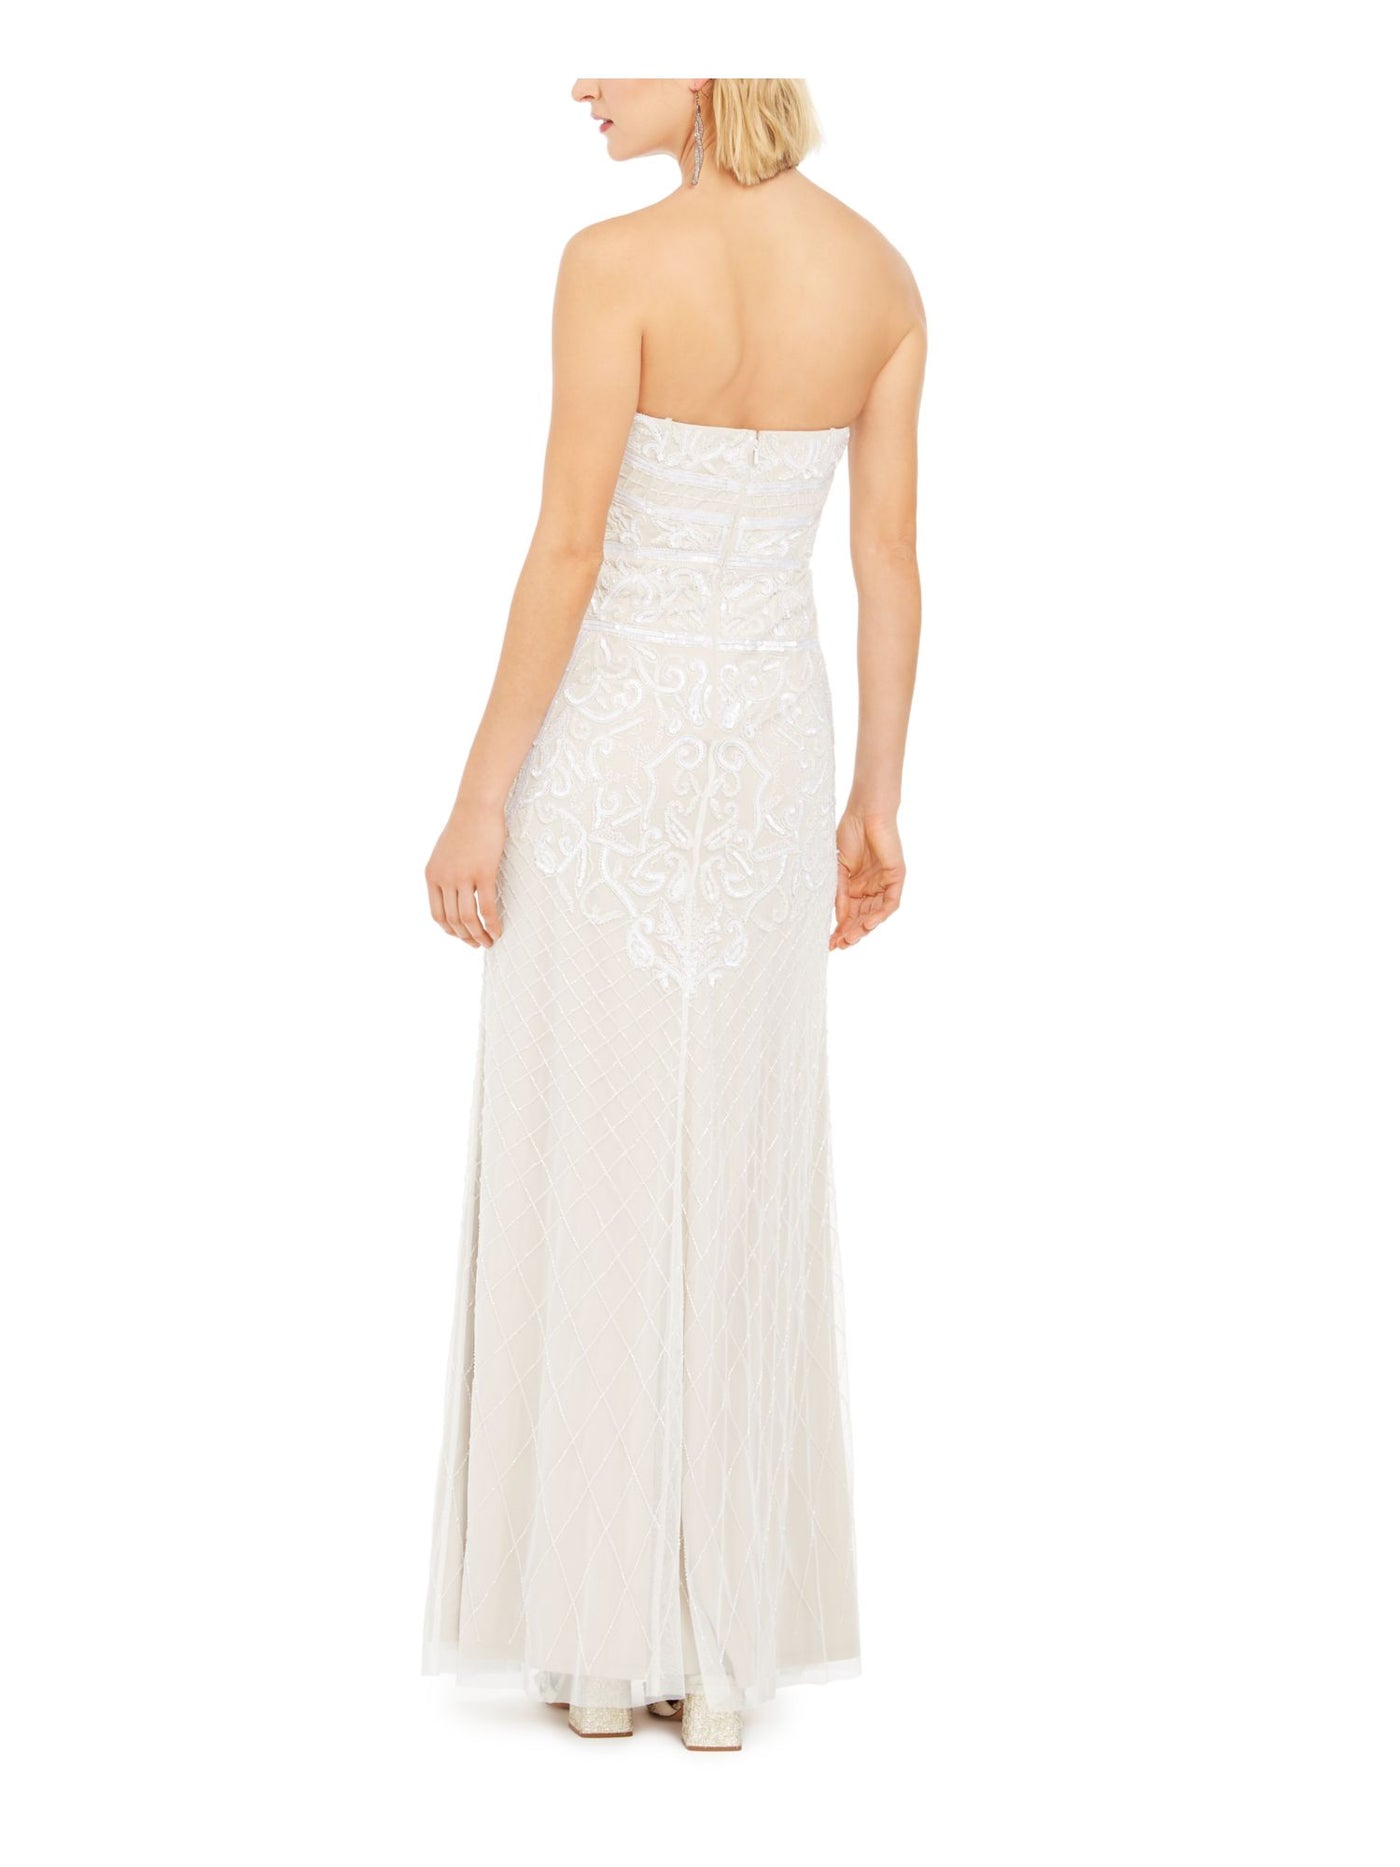 ADRIANNA PAPELL Womens Ivory Beaded Sequined Strapless Full-Length Formal Sheath Dress 18